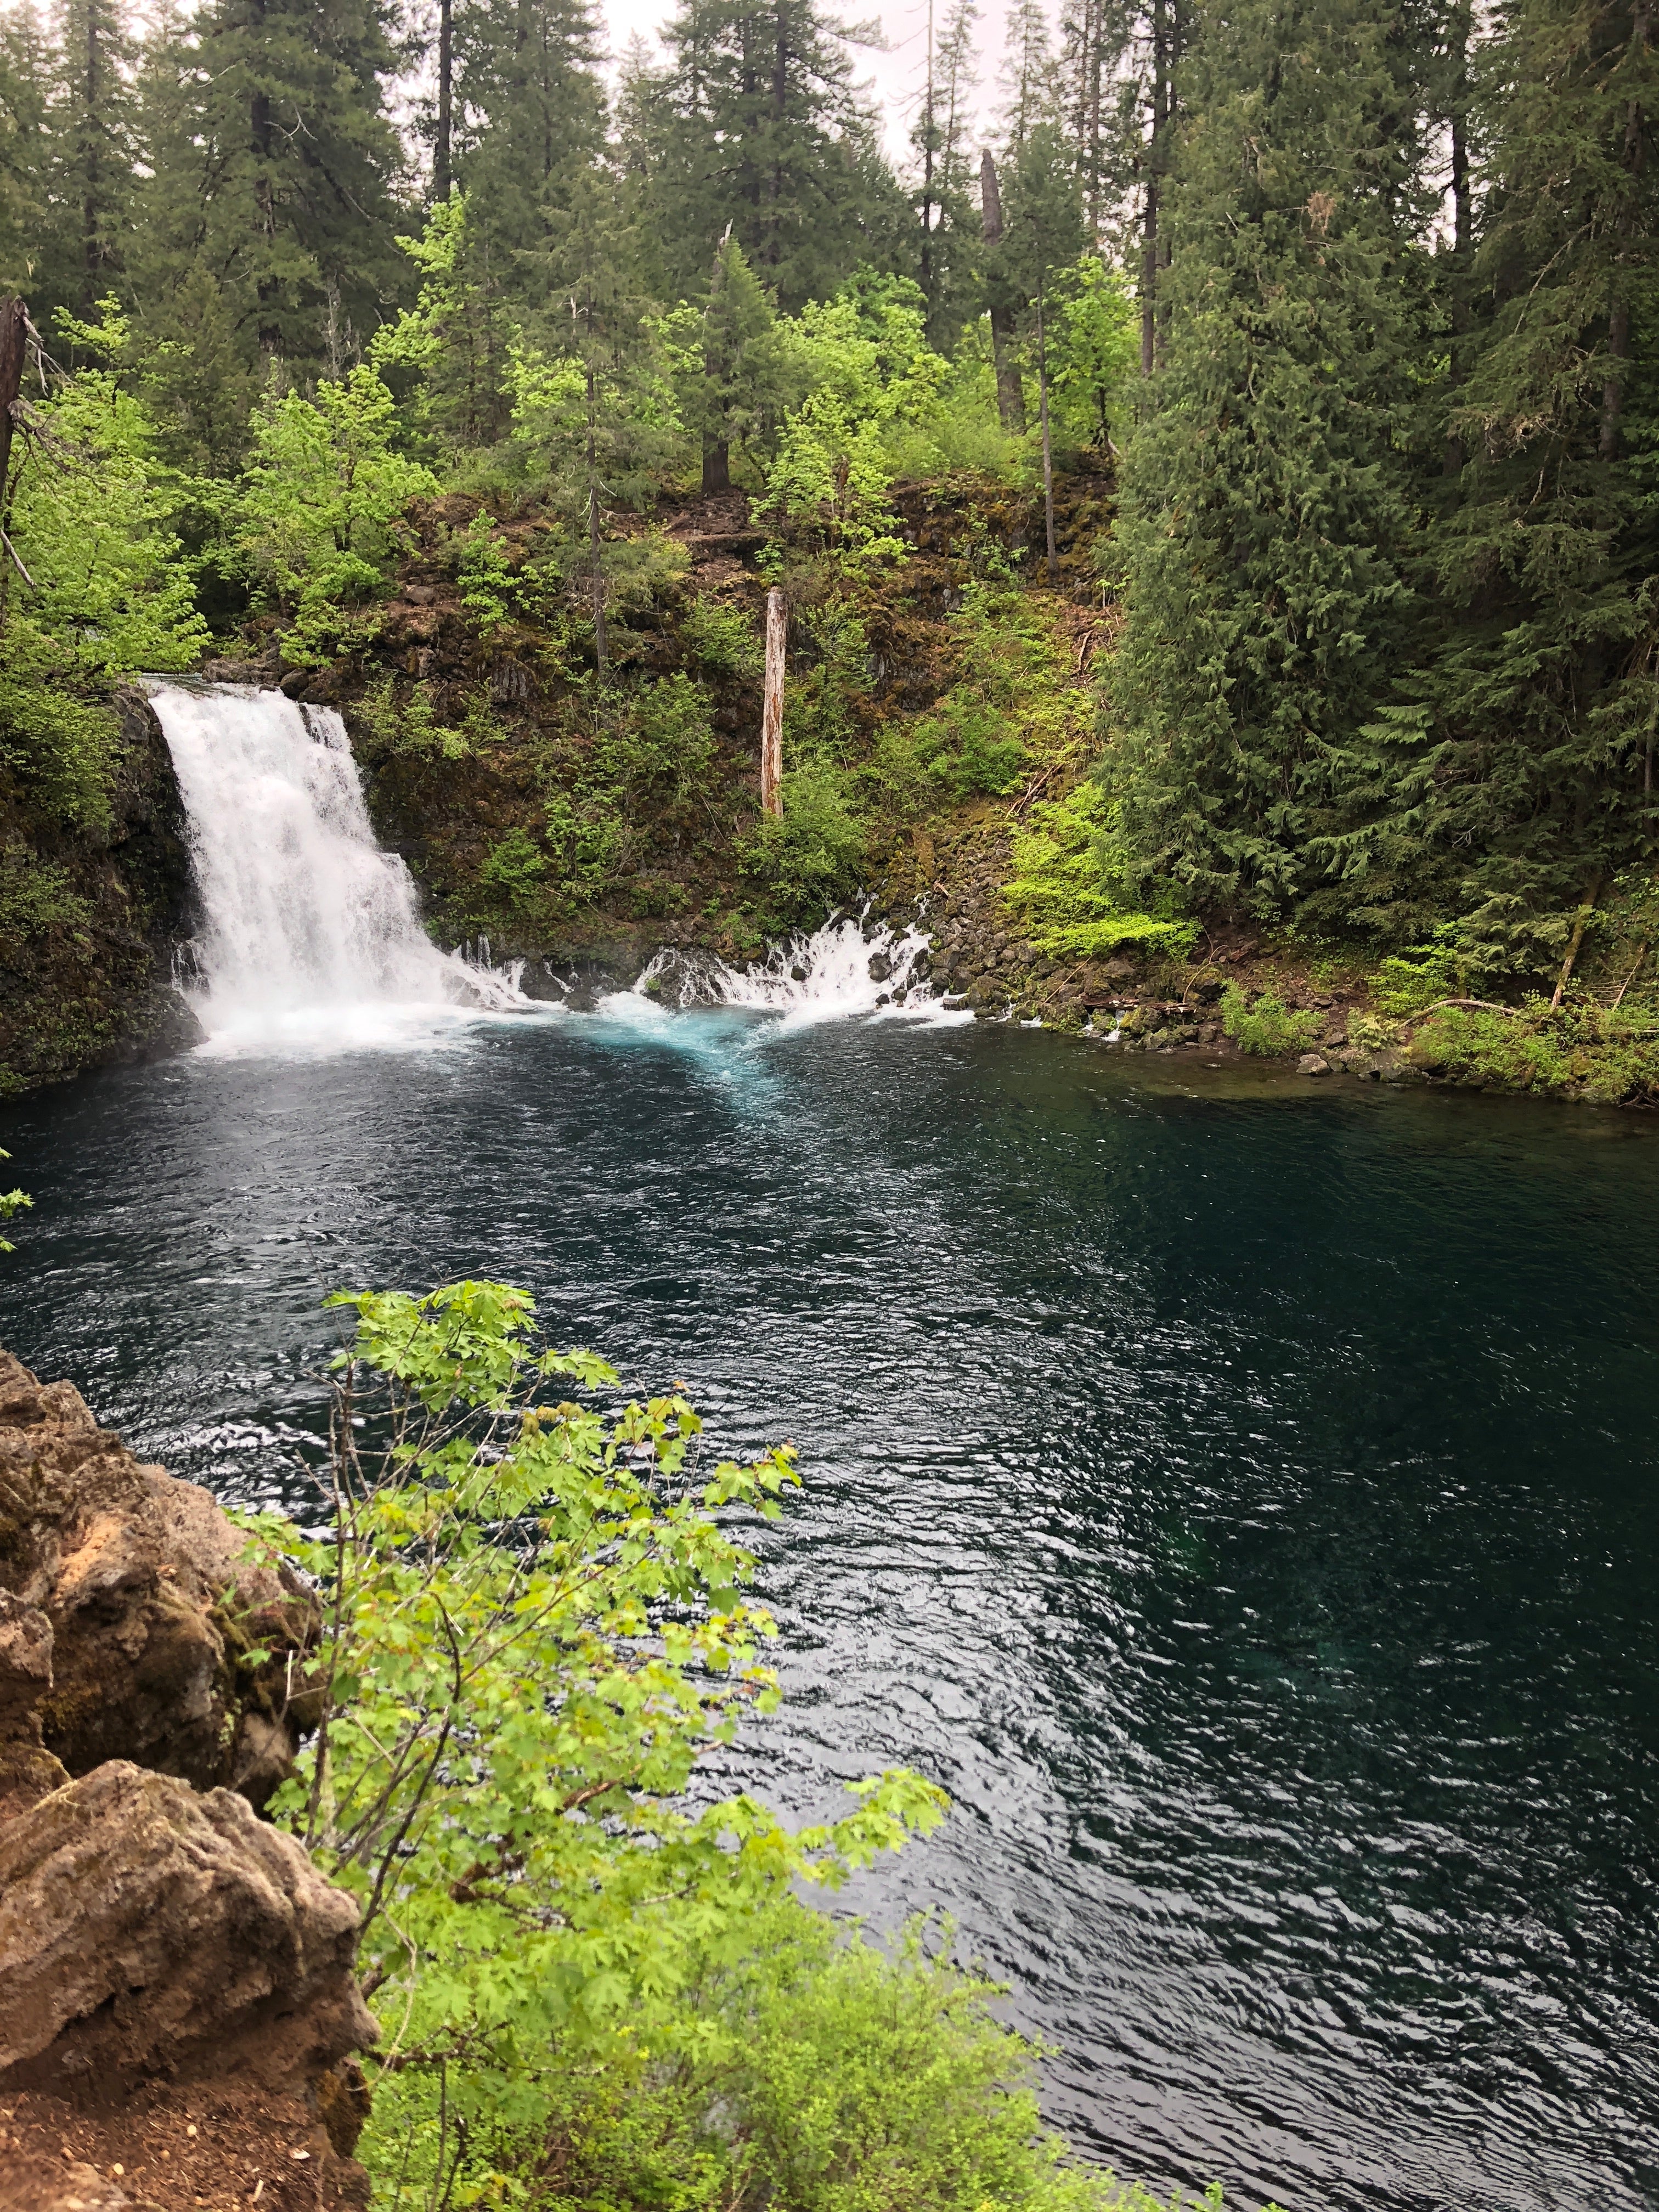 Camper submitted image from McKenzie River Area - 2